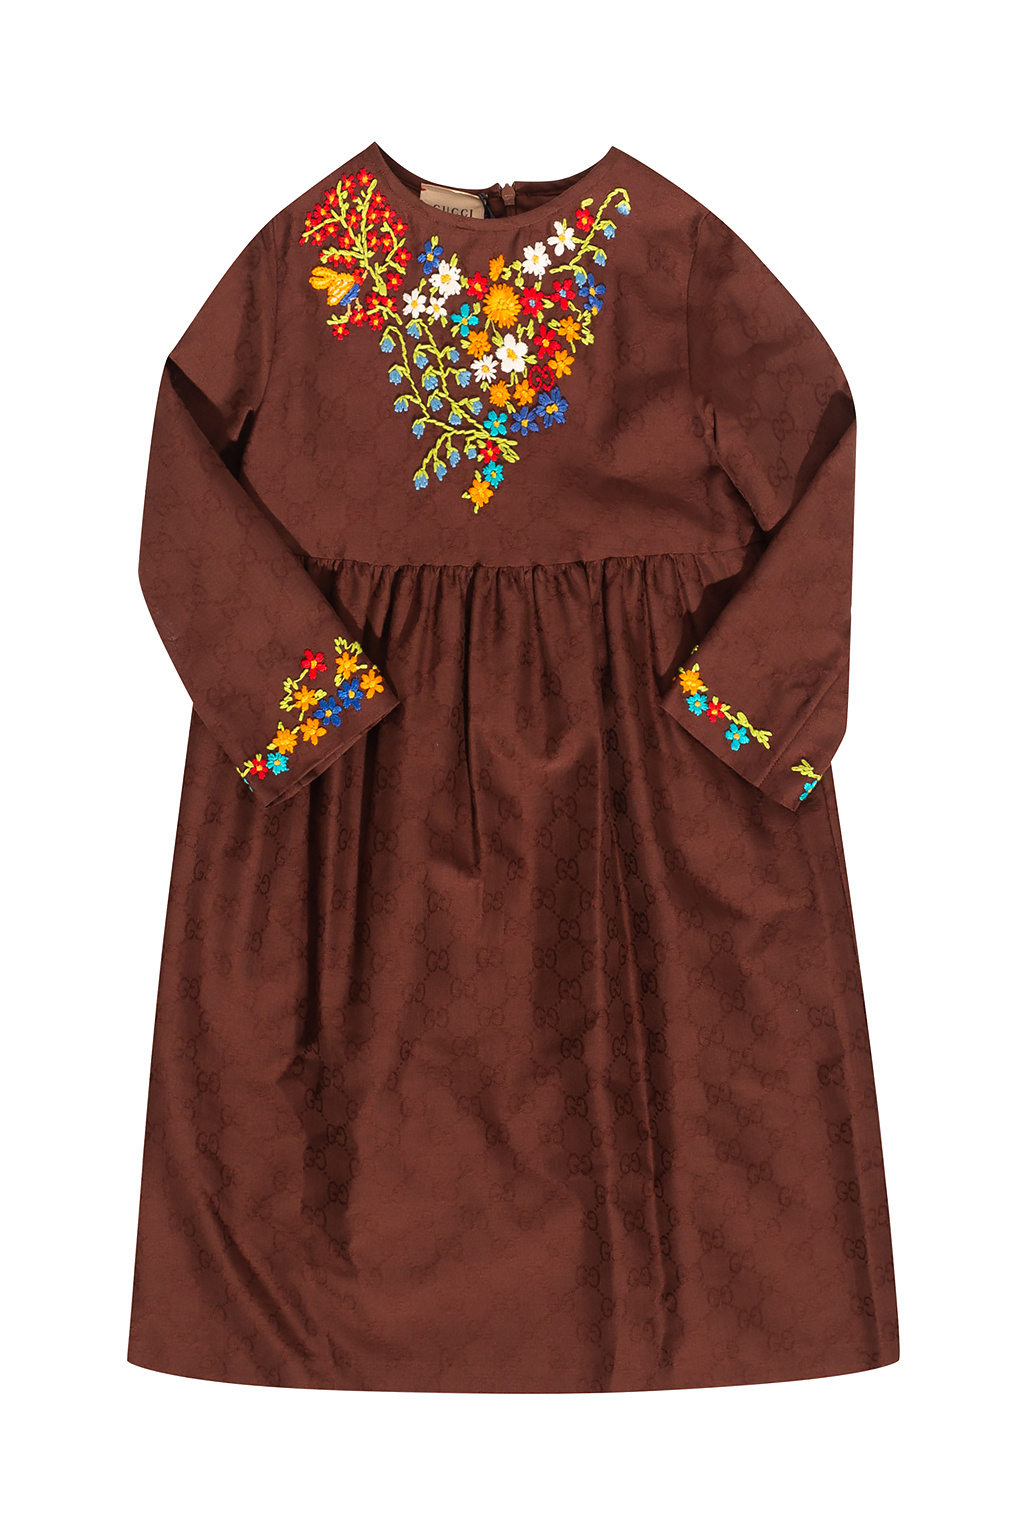 Girls Clothing, Beautiful Brand New Embroidered Work Dress For 13 To 14  Years Girls